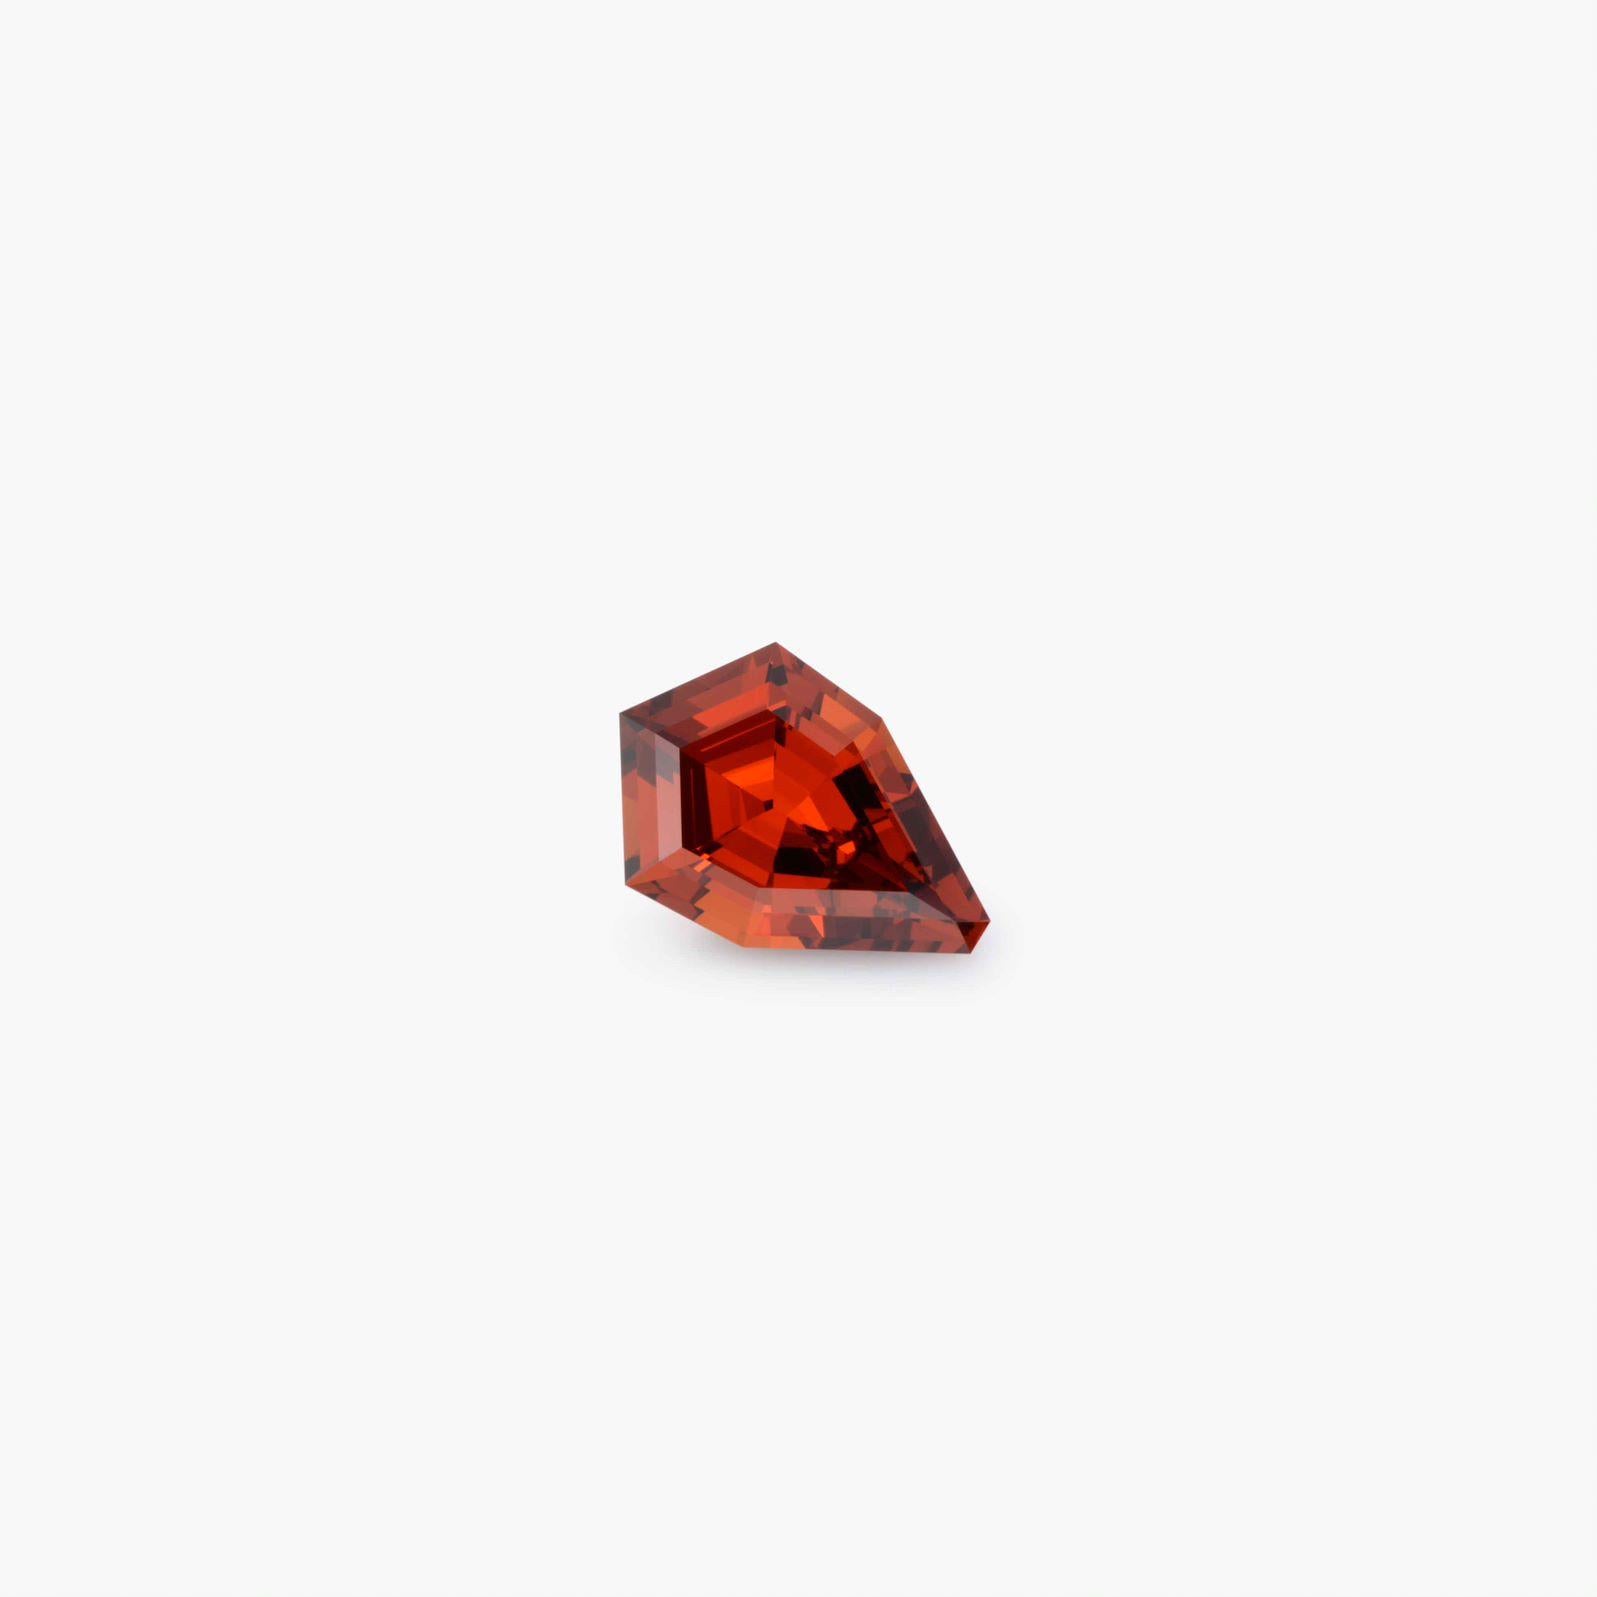 Fearless 7.39 carat Spessartite Garnet unmounted fancy Shield gem, offered loose to a fine gemstone connoisseur.
Returns are accepted and paid by us within 7 days of delivery.
We offer supreme custom jewelry work upon request. Please contact us for